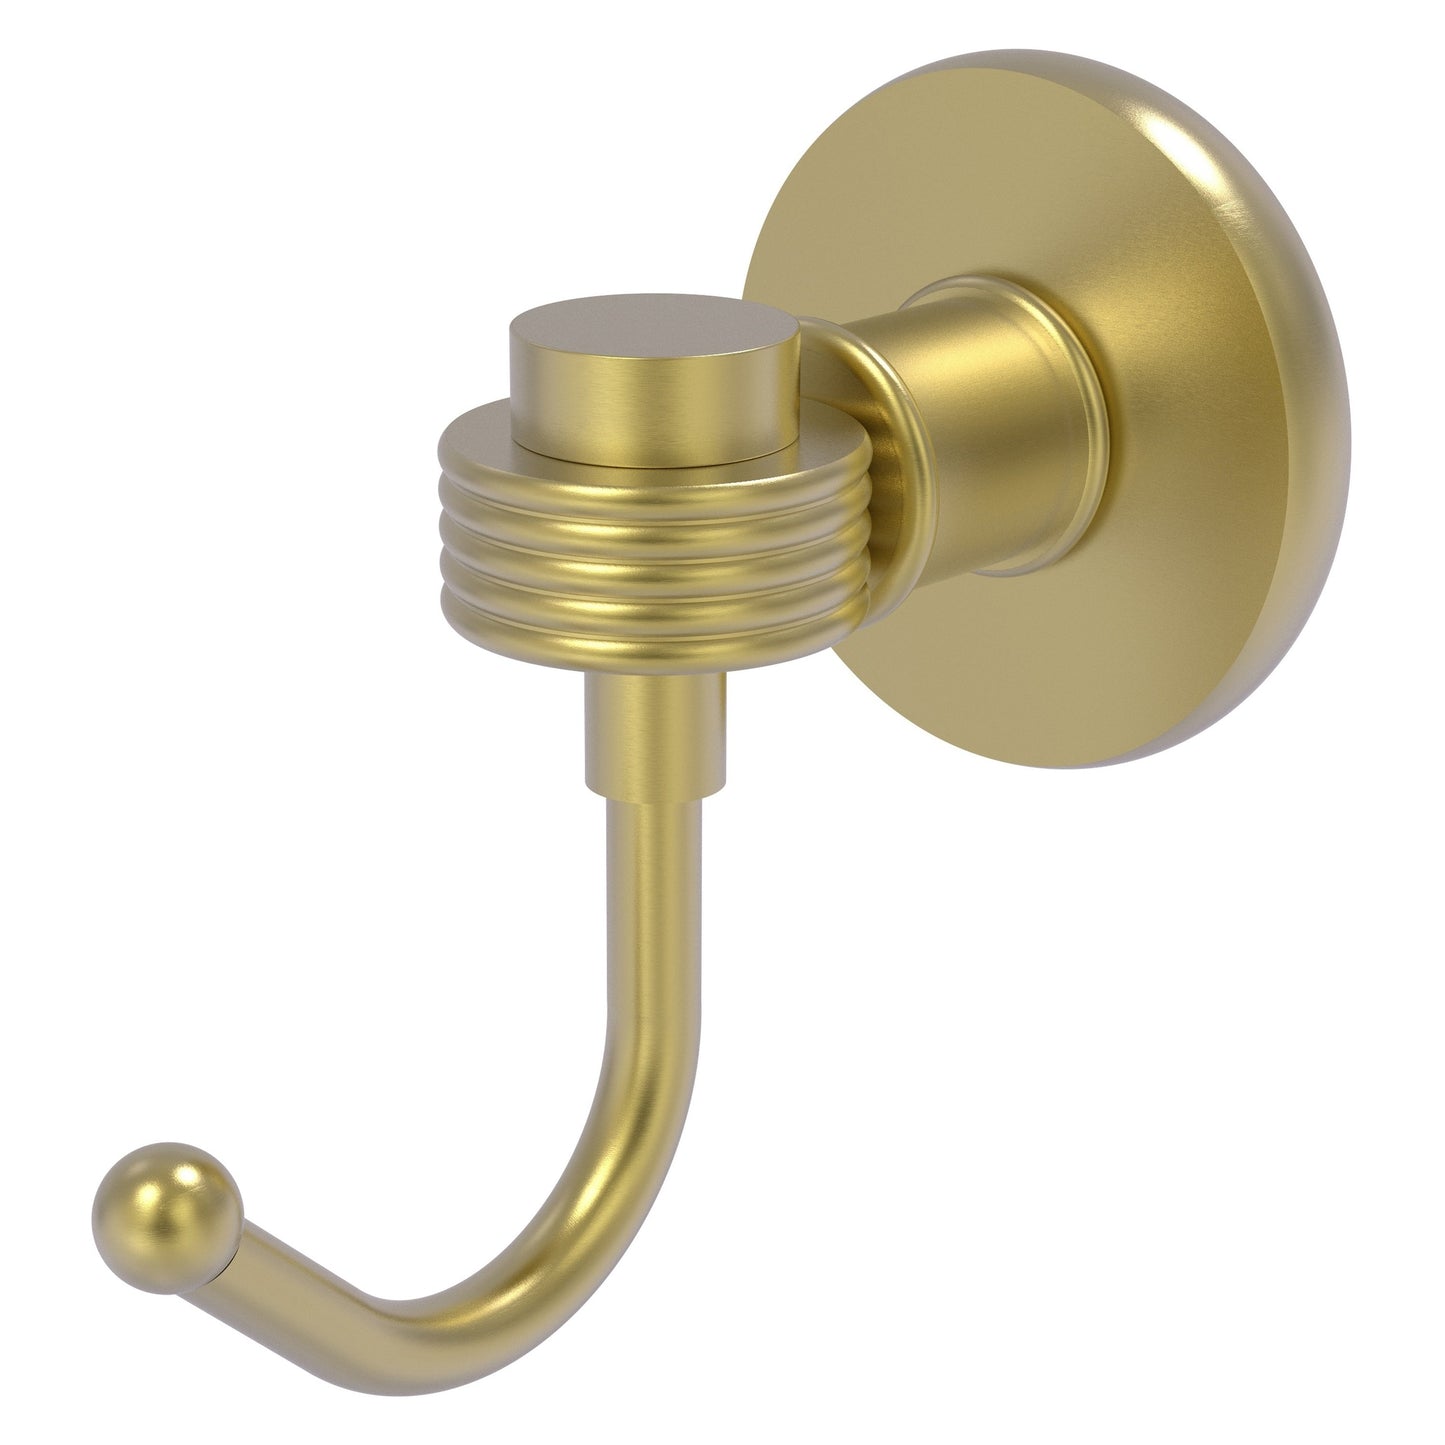 Allied Brass Skyline 2020G 2.8" x 4.77" Satin Brass Solid Brass Robe Hook With Grooved Accents